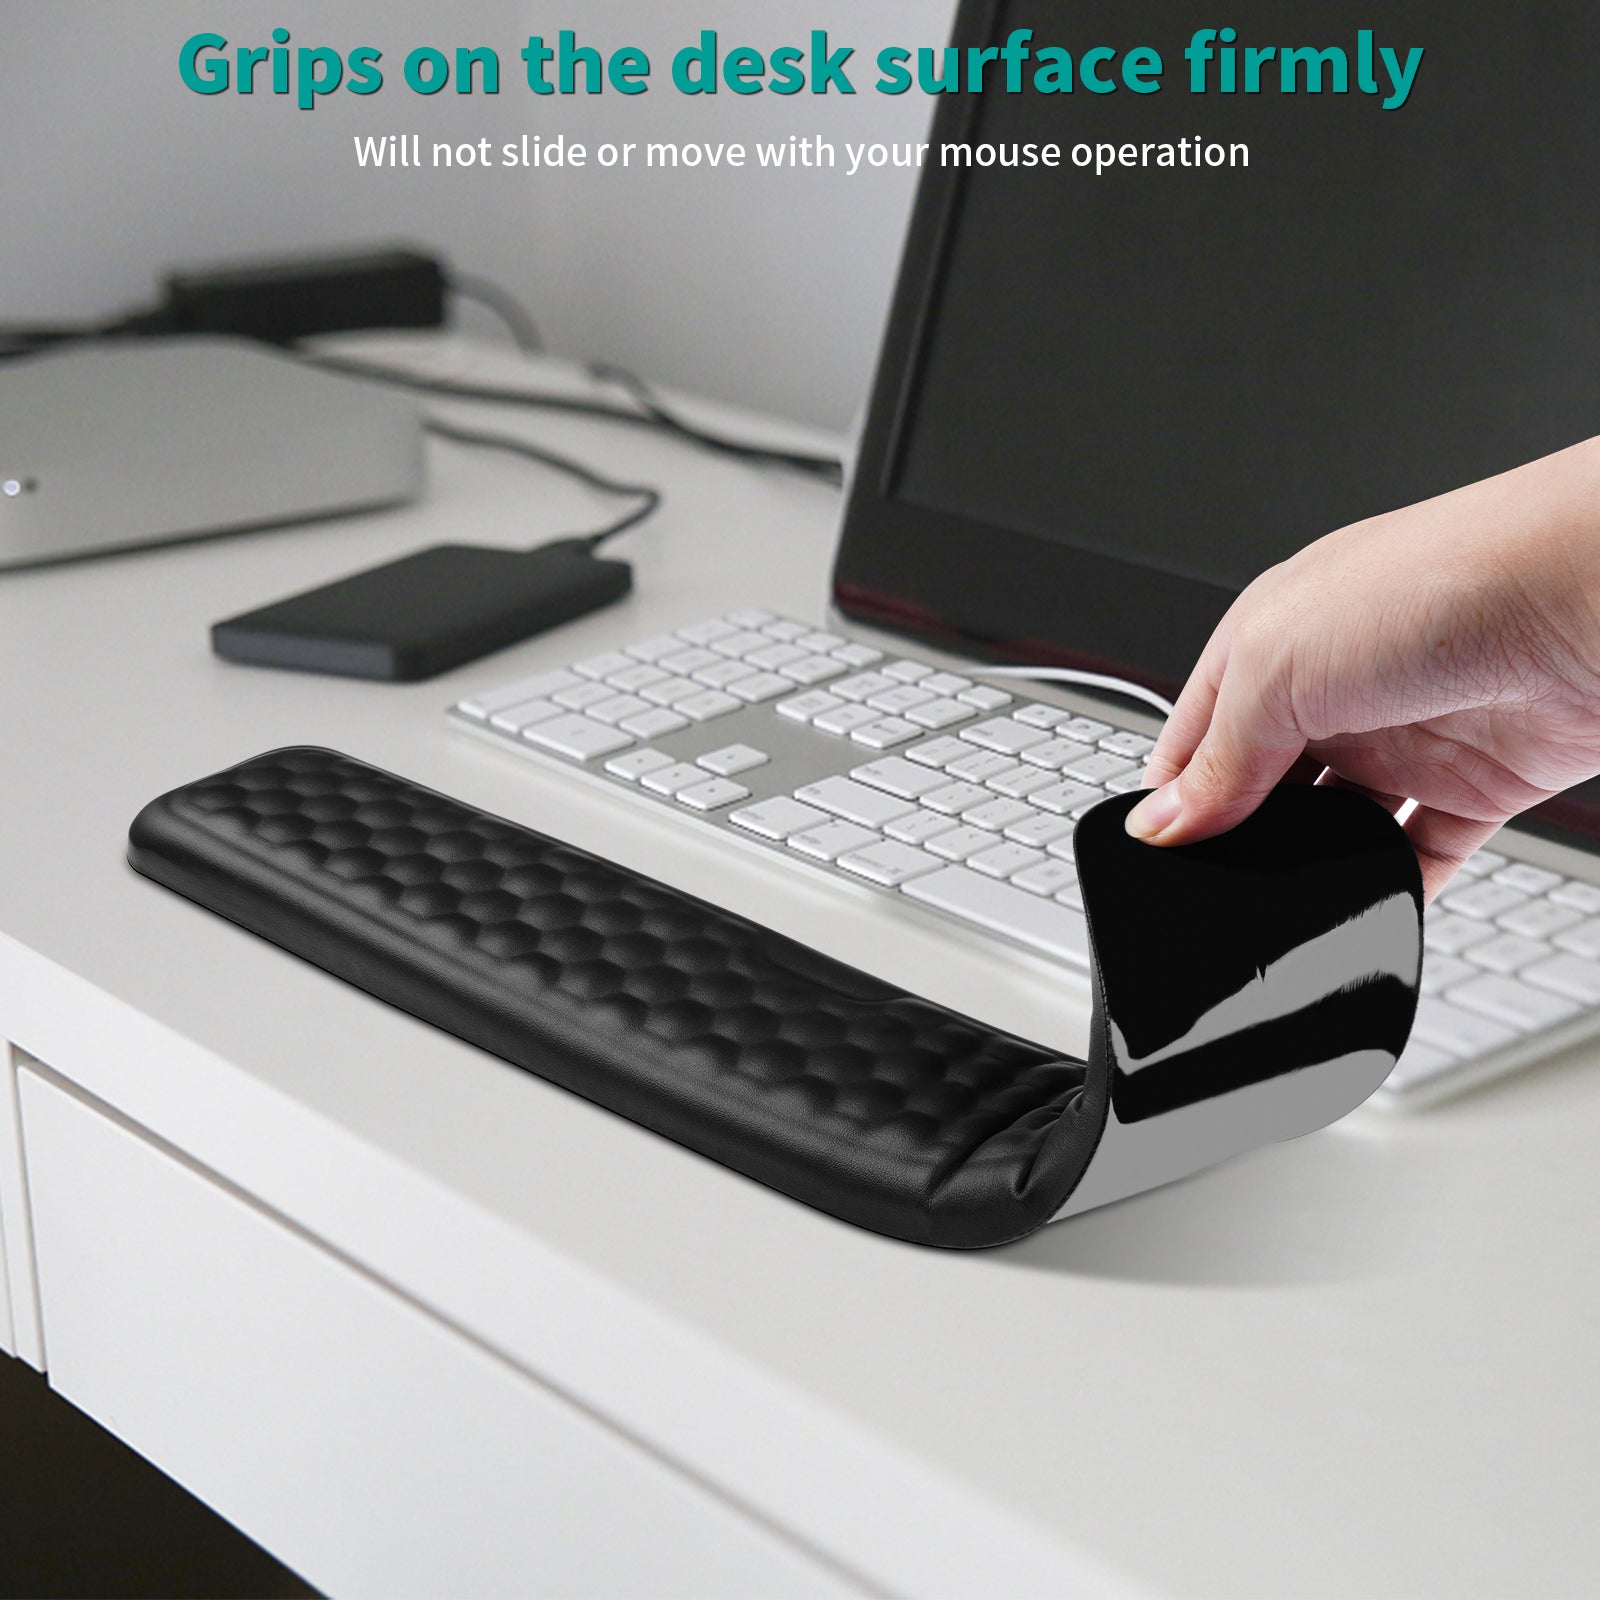 Giecy Mouse pad Wrist Support ，Ergonomic Memory Foam Mouse Wrist Rest